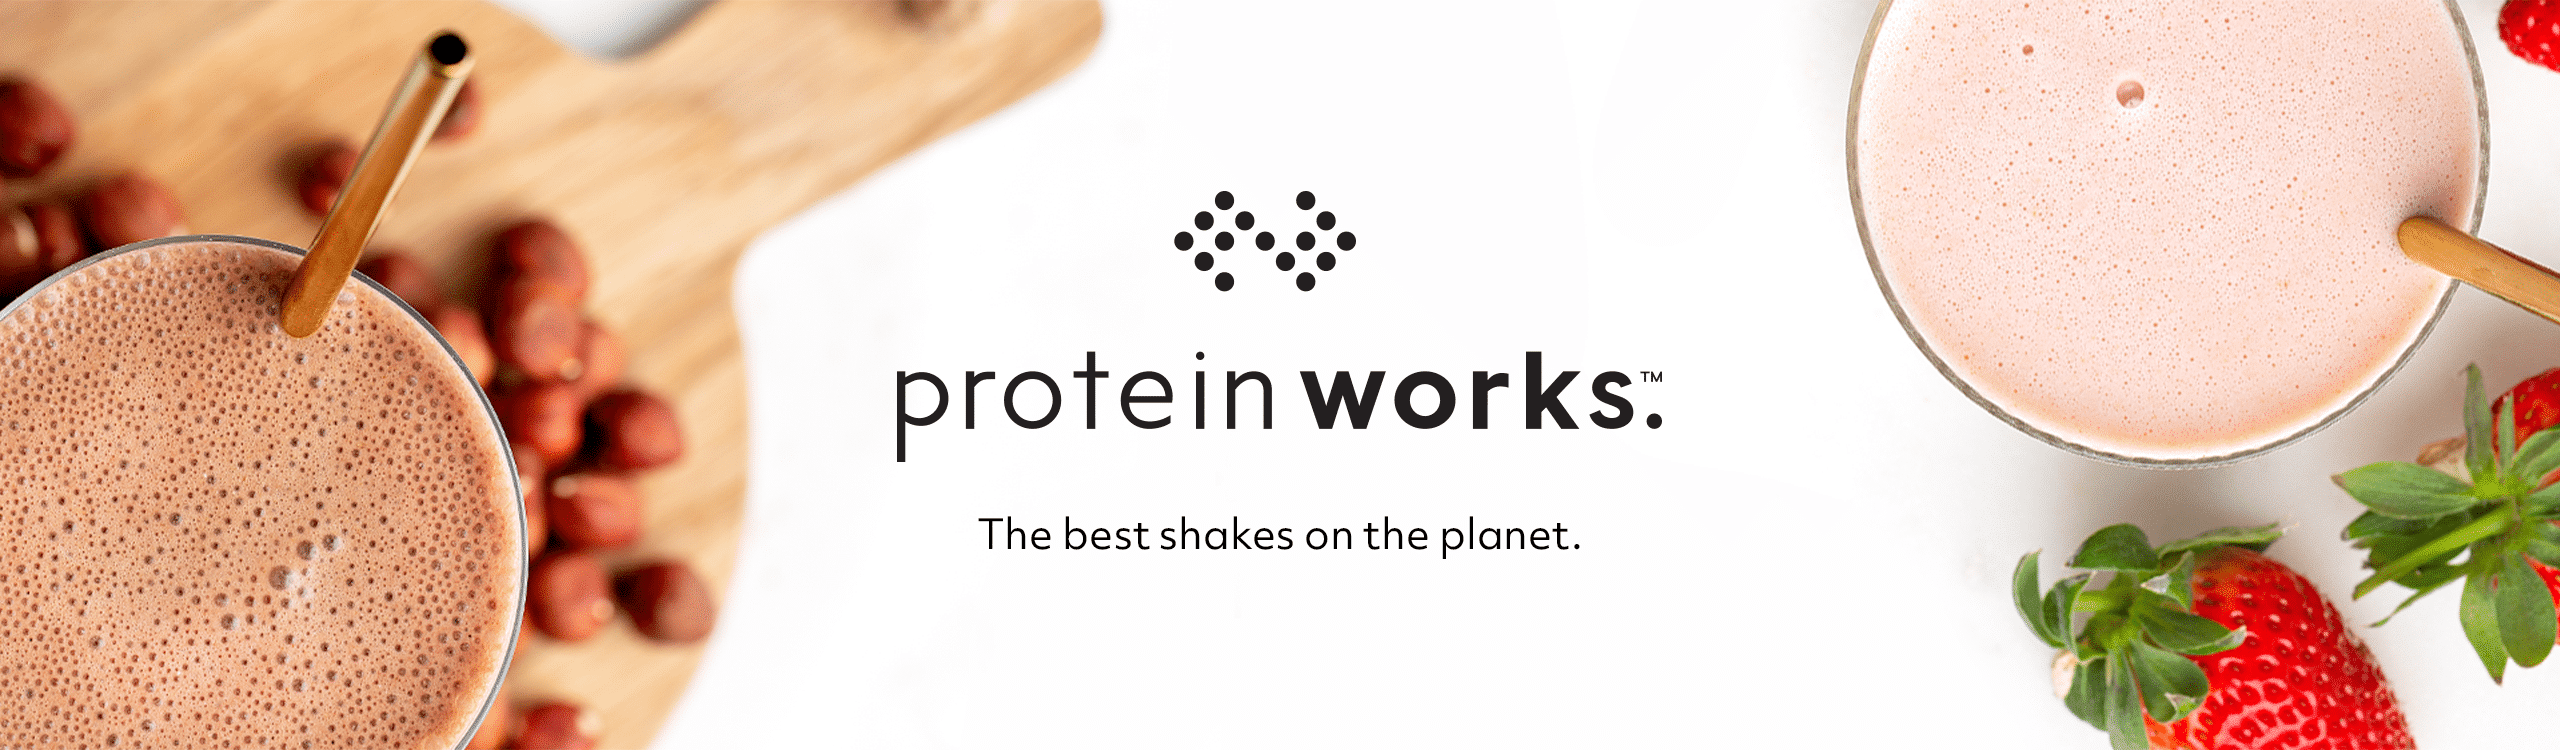 https://img.theproteinworks.com/v7/_img/cms-data/uploads/Welcome_to_PW_LP_4ccbc73047.png